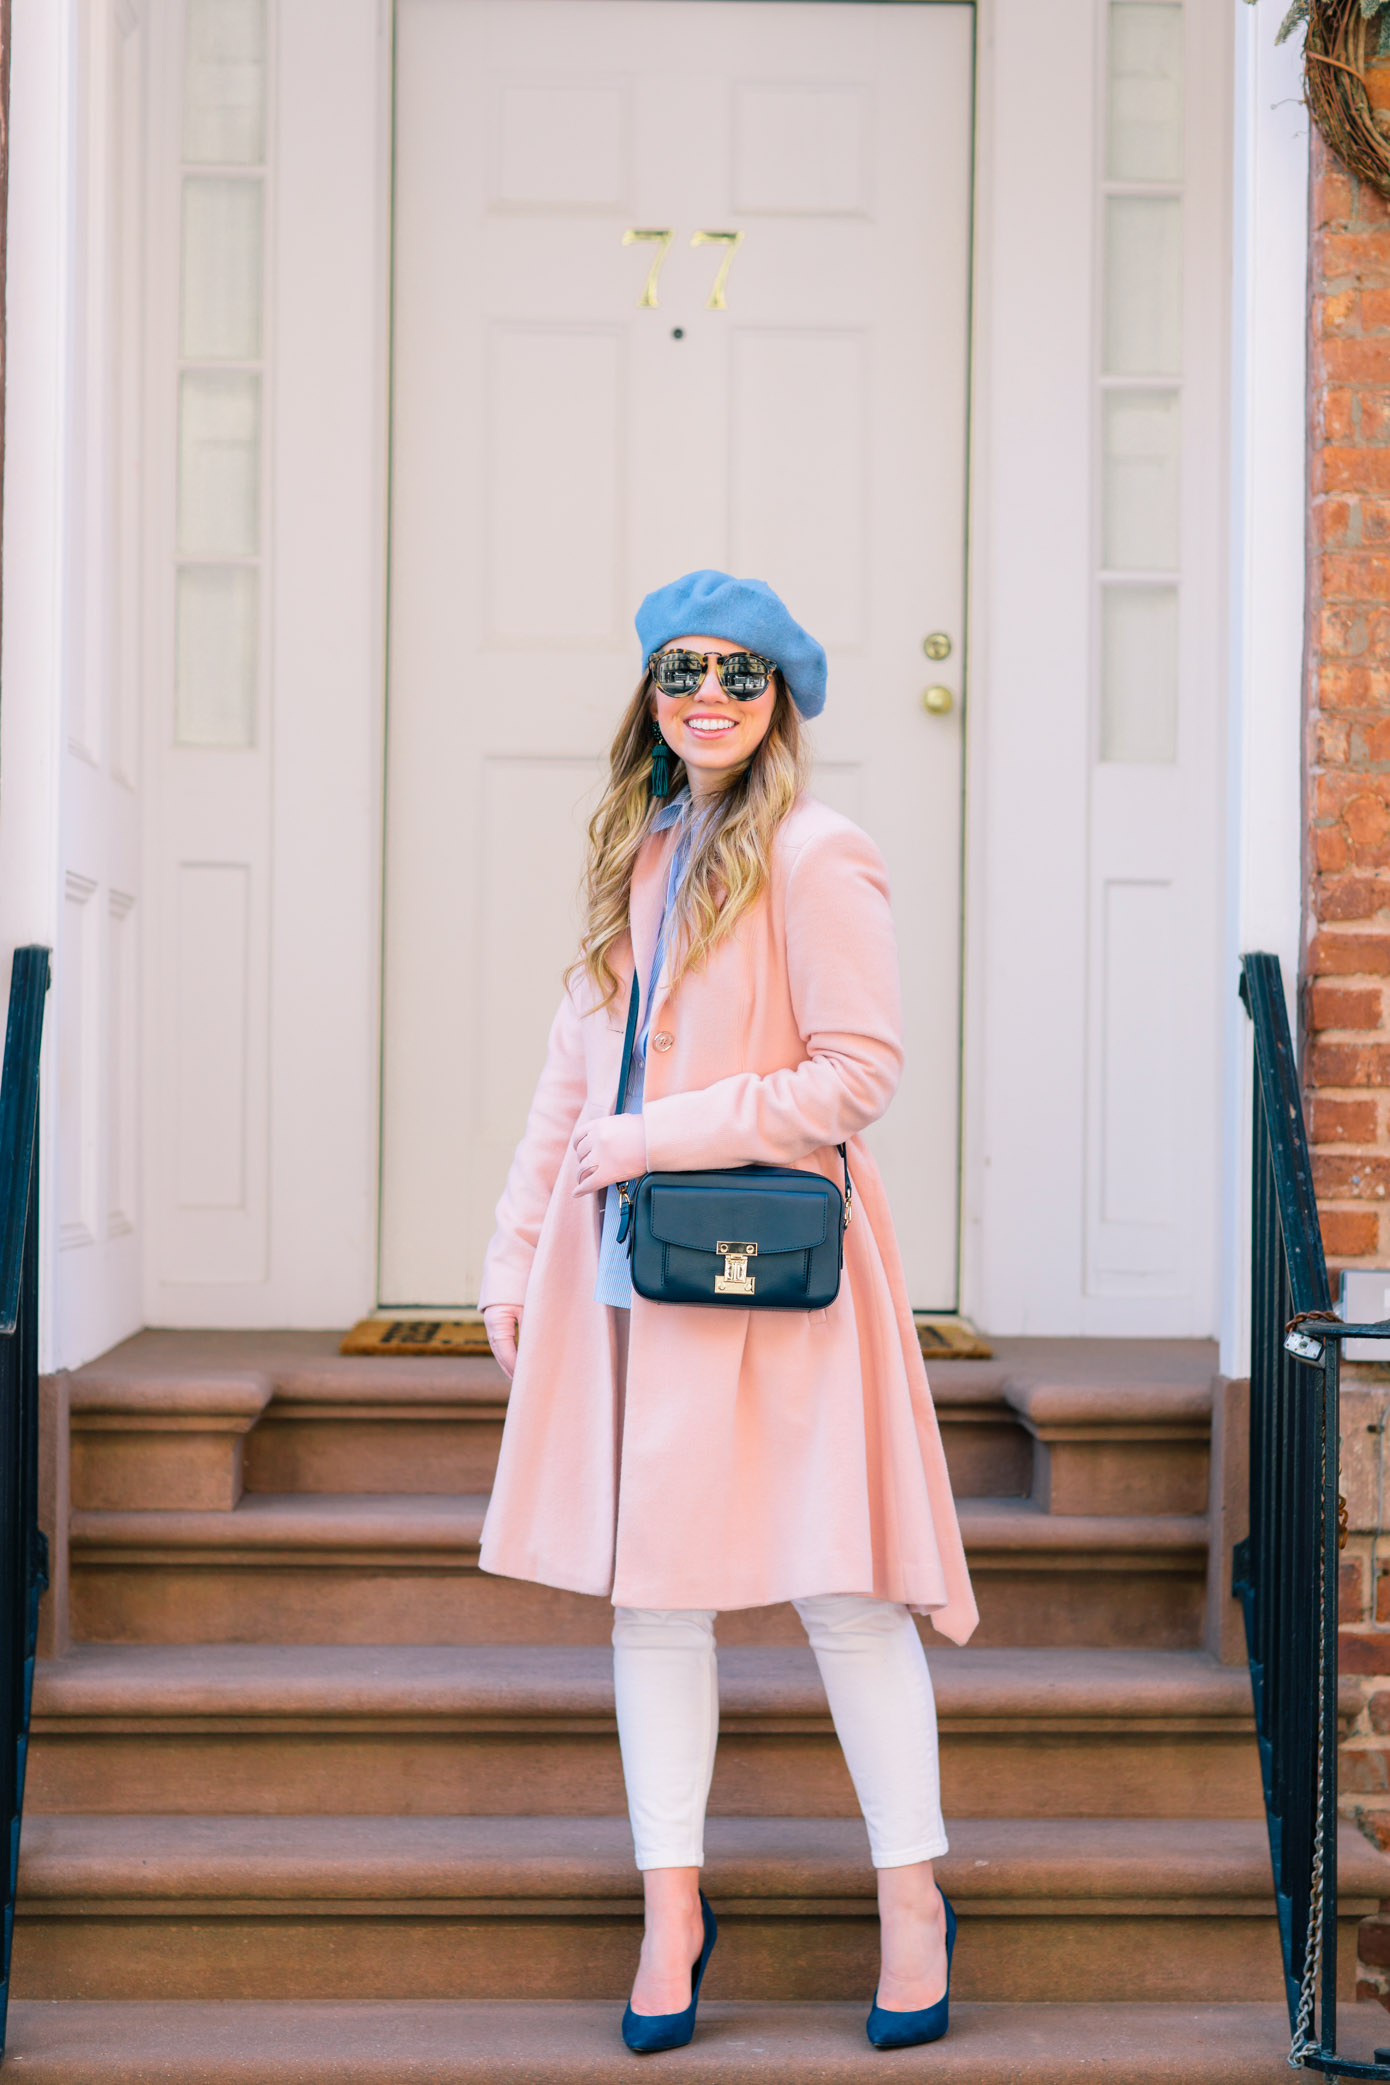 White Jeans: Transitioning into Spring | Blue, White, and Pink Outfit Idea | Louella Reese Life & Style Blog 